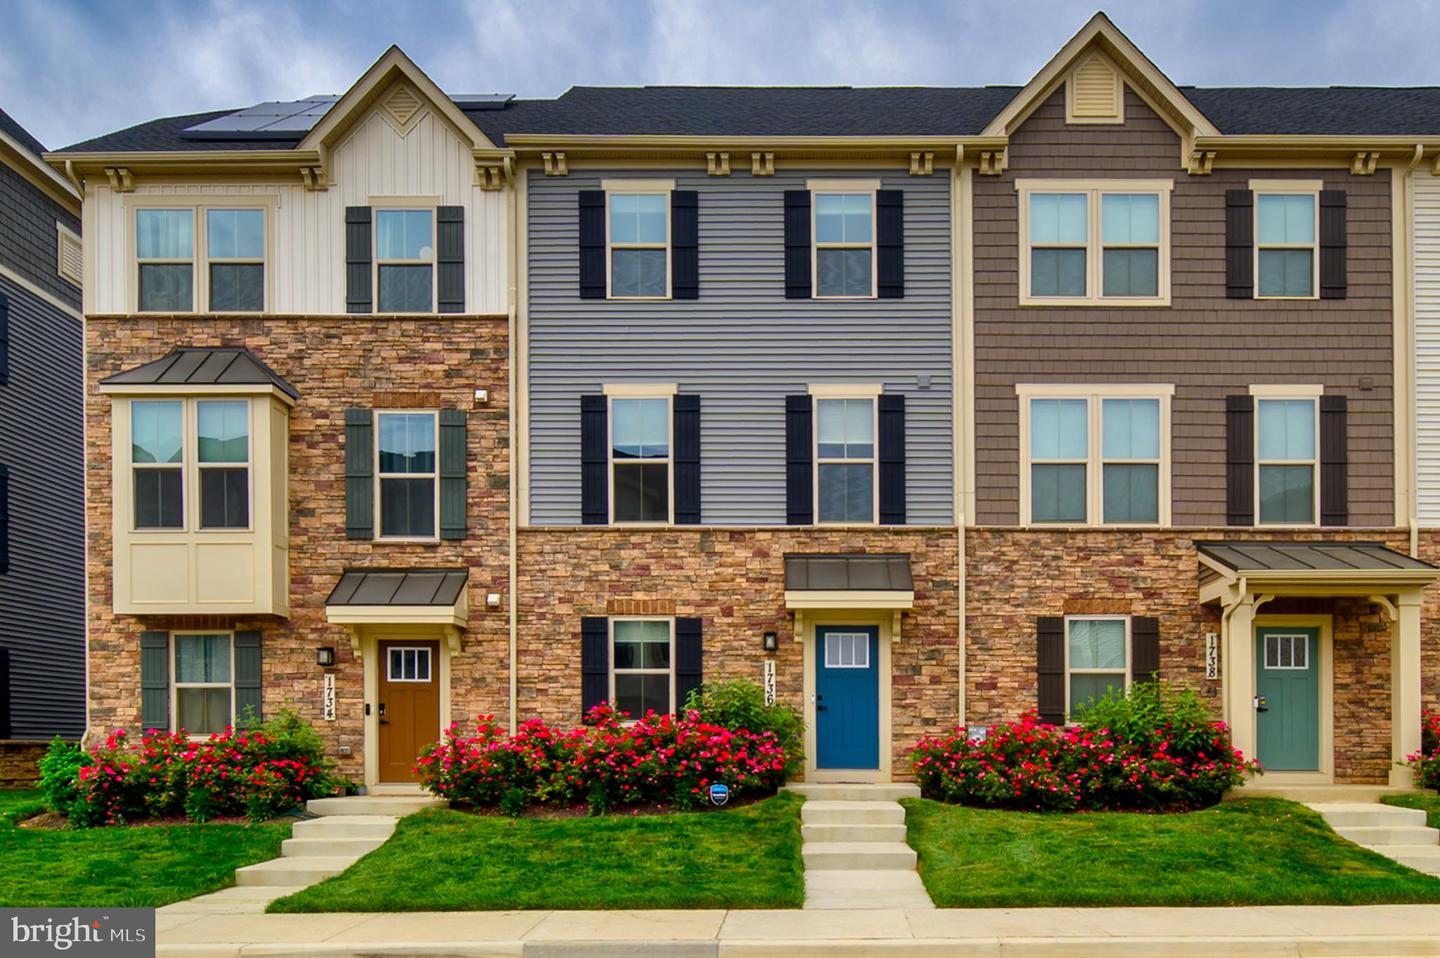 View Laurel, MD 20708 townhome